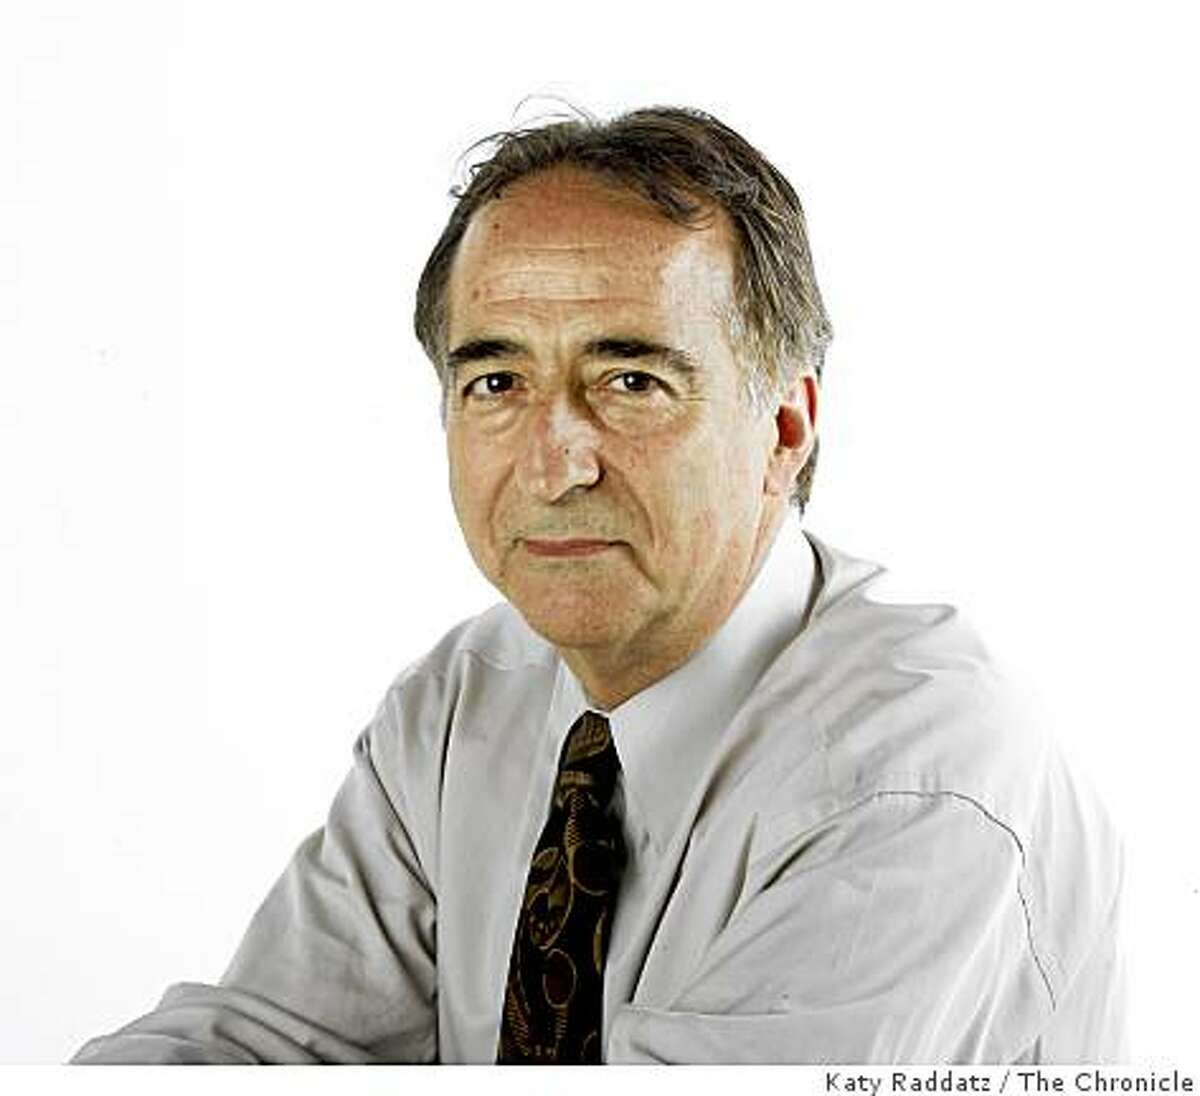 Andrew Ross poses for a portrait in San Francisco, Calif. on Tuesday Sept. 16, 2008